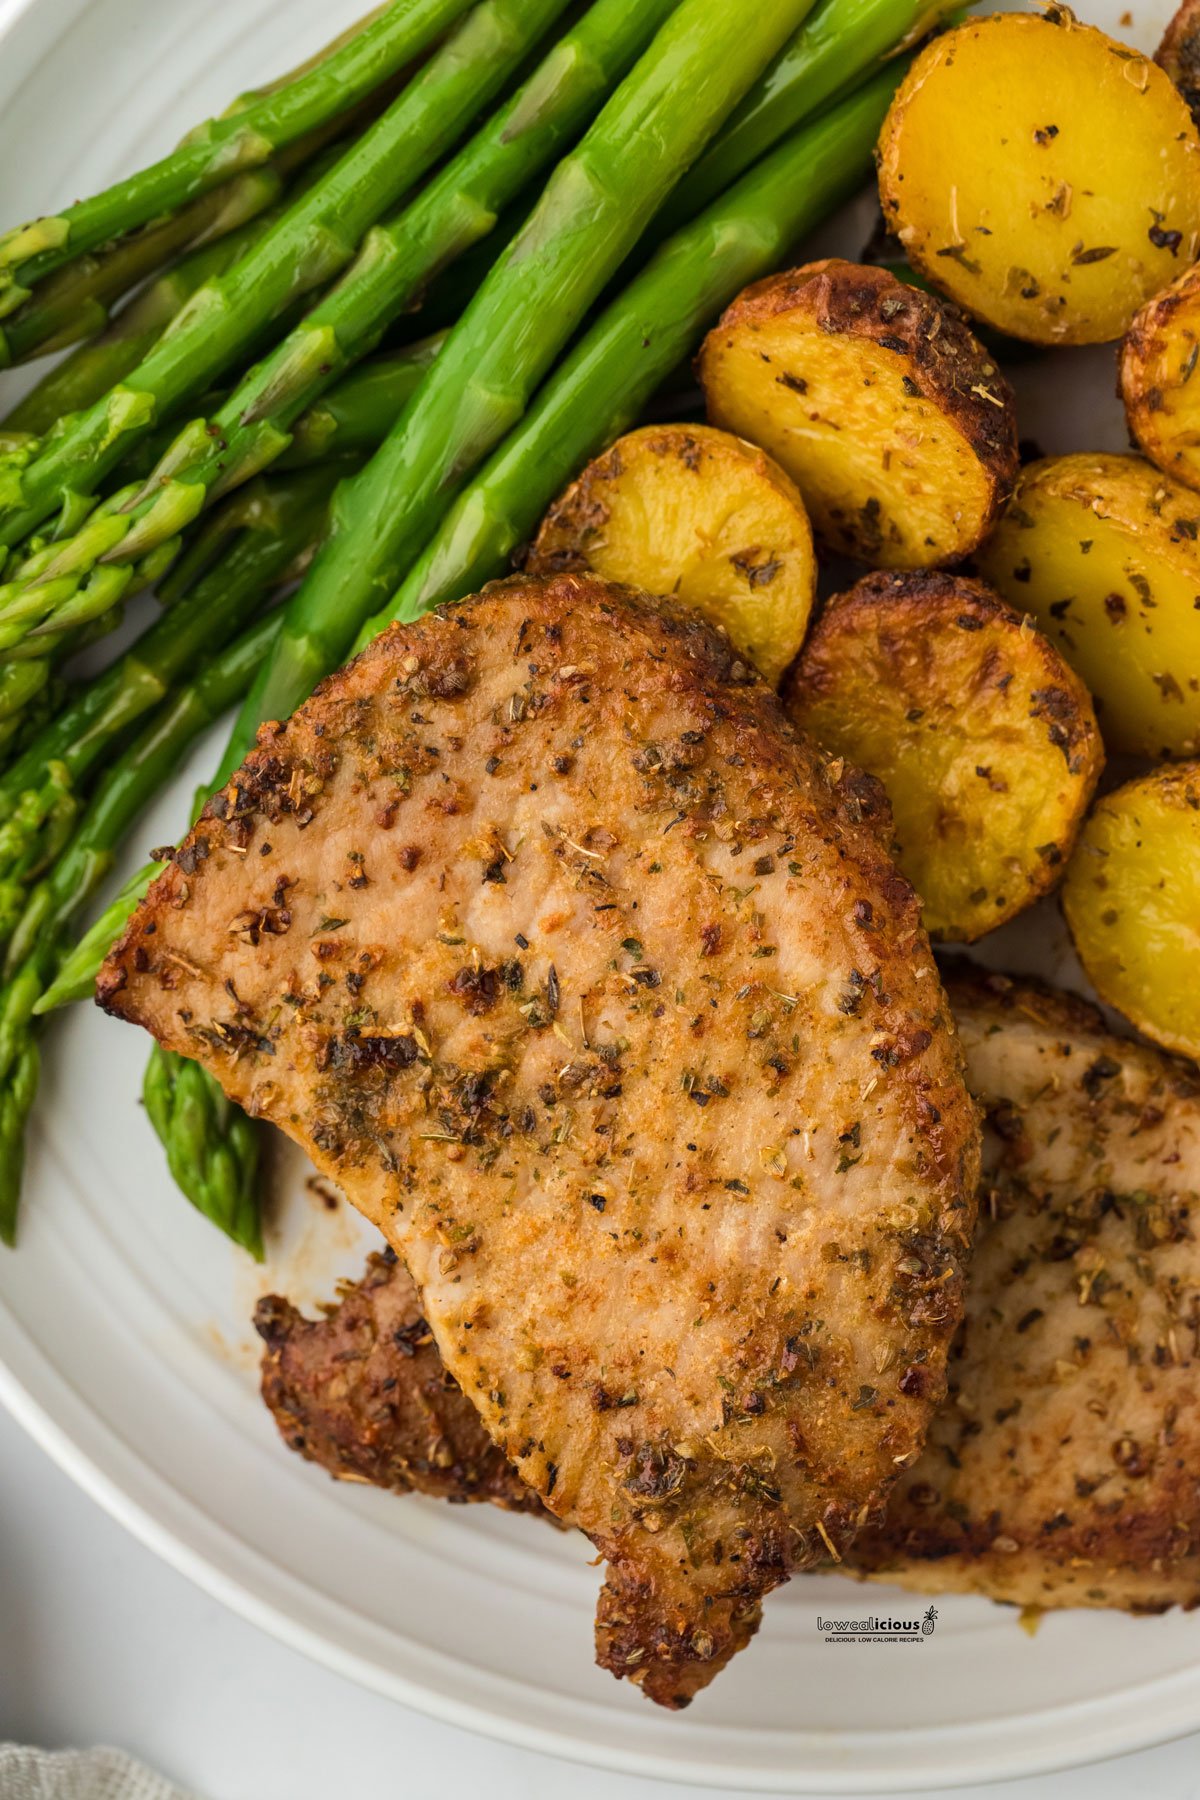 baked ranch pork chops on a white plate with roasted potatoes and steamed asparagus